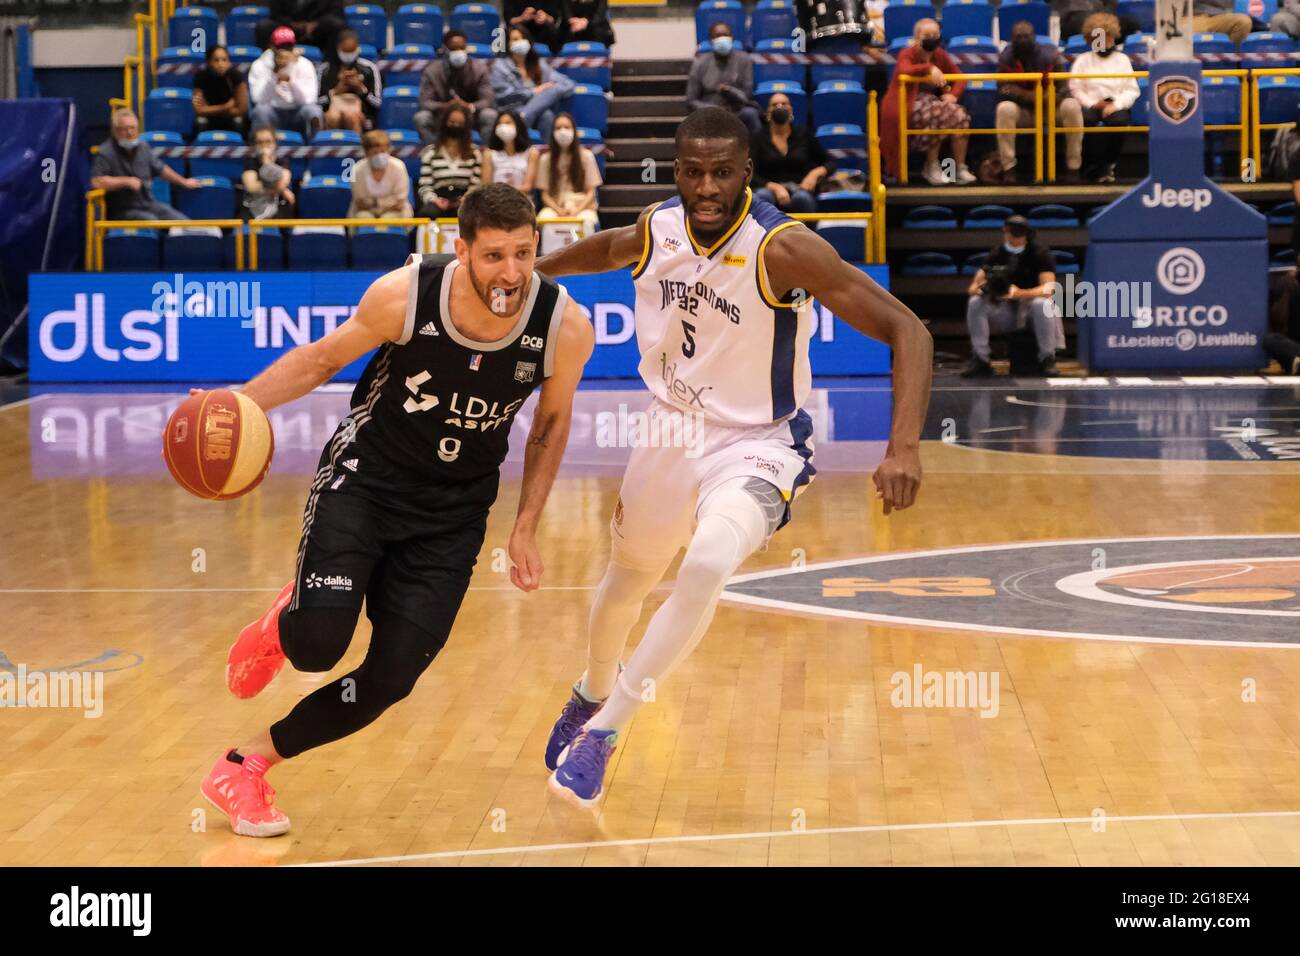 Levallois, Hauts de Seine, France. 5th June, 2021. ANTOINE DIOT Point Guard  of LDLC-ASVEL in action during the French Basketball championship Jeep Elite  between Boulogne-Levallois and LDLC ASVEL at Palais des Sports